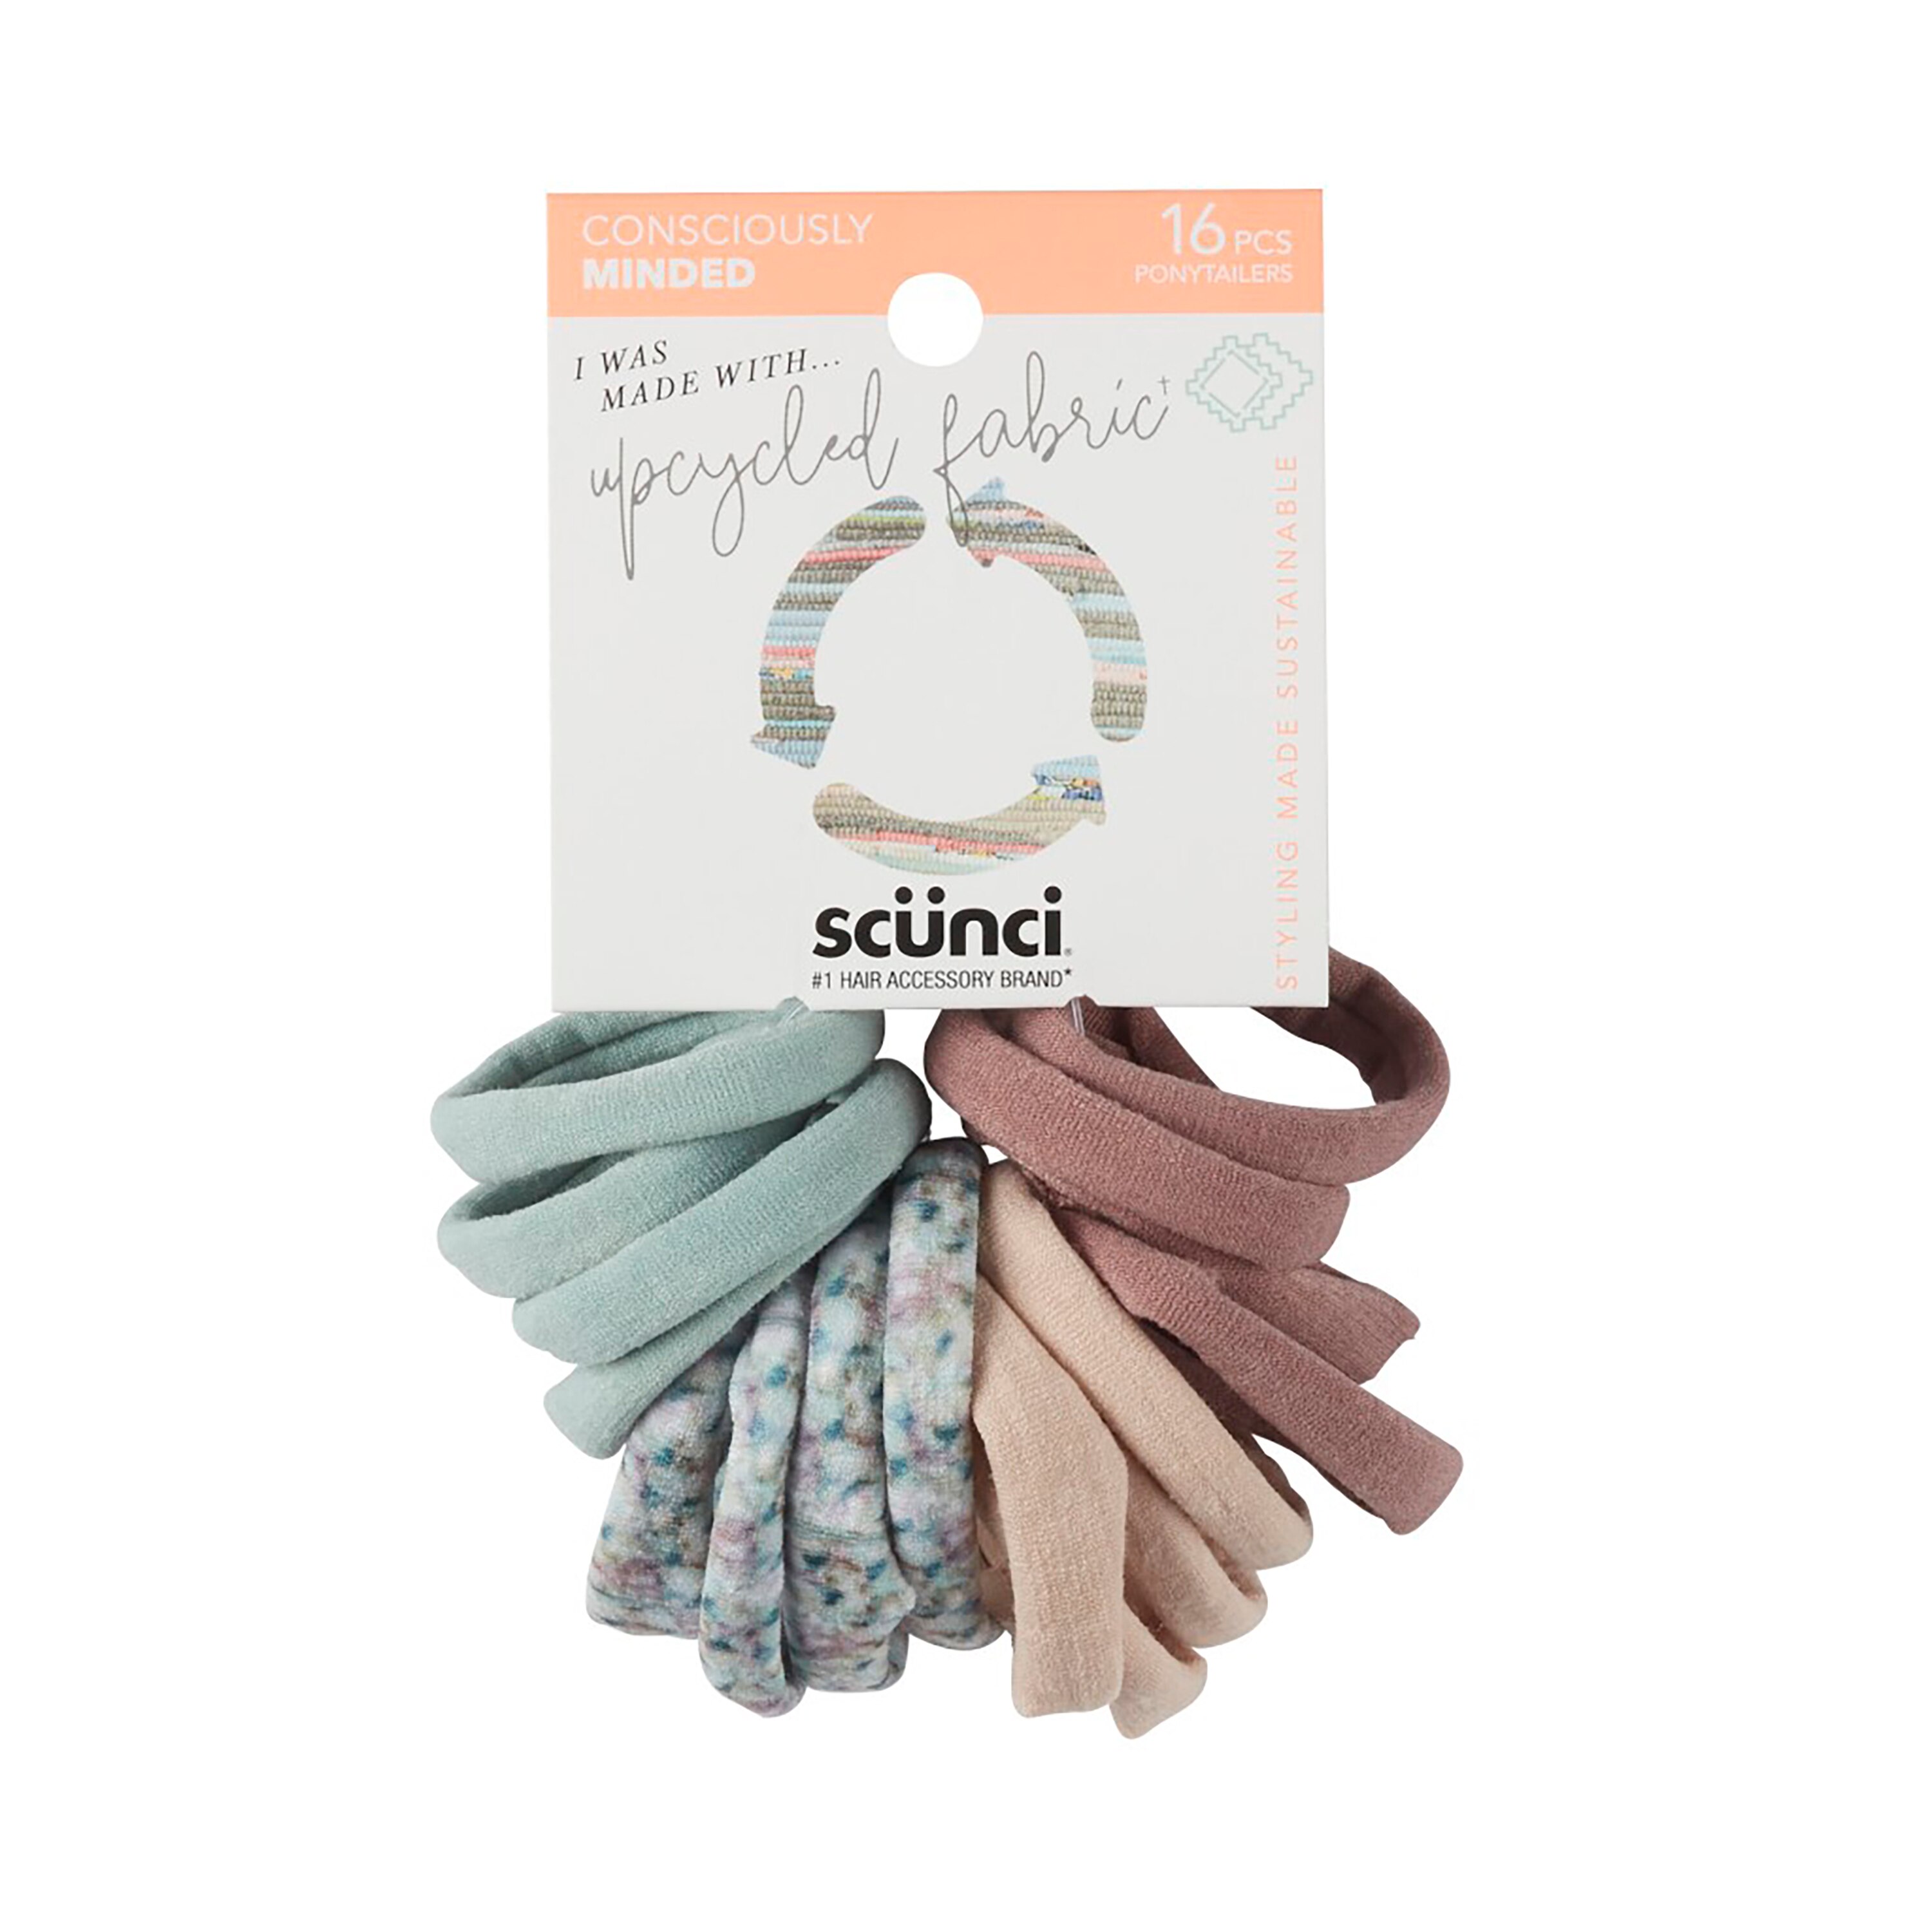 Scunci Consciously Minded Solid and Printed Ponytailers 16pk